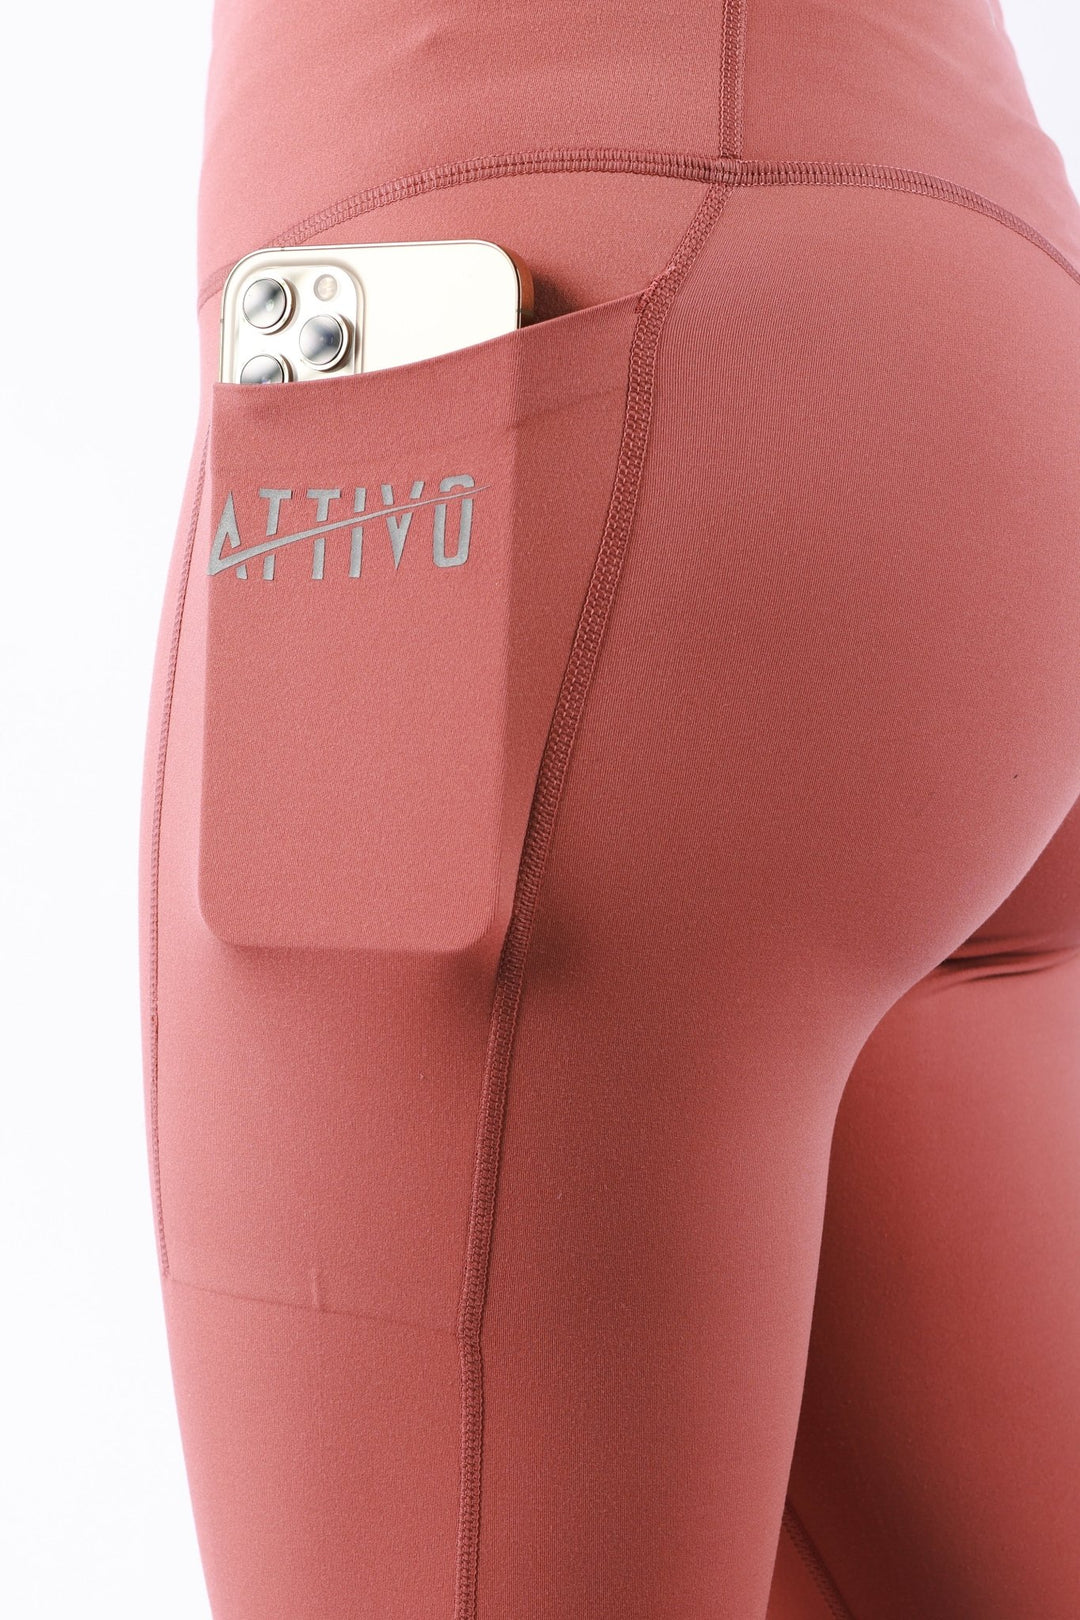 Athletic Women's Leggings With Pockets In Withered Rose - attivousa Free Shipping over $75 Womens Activewear Attivo